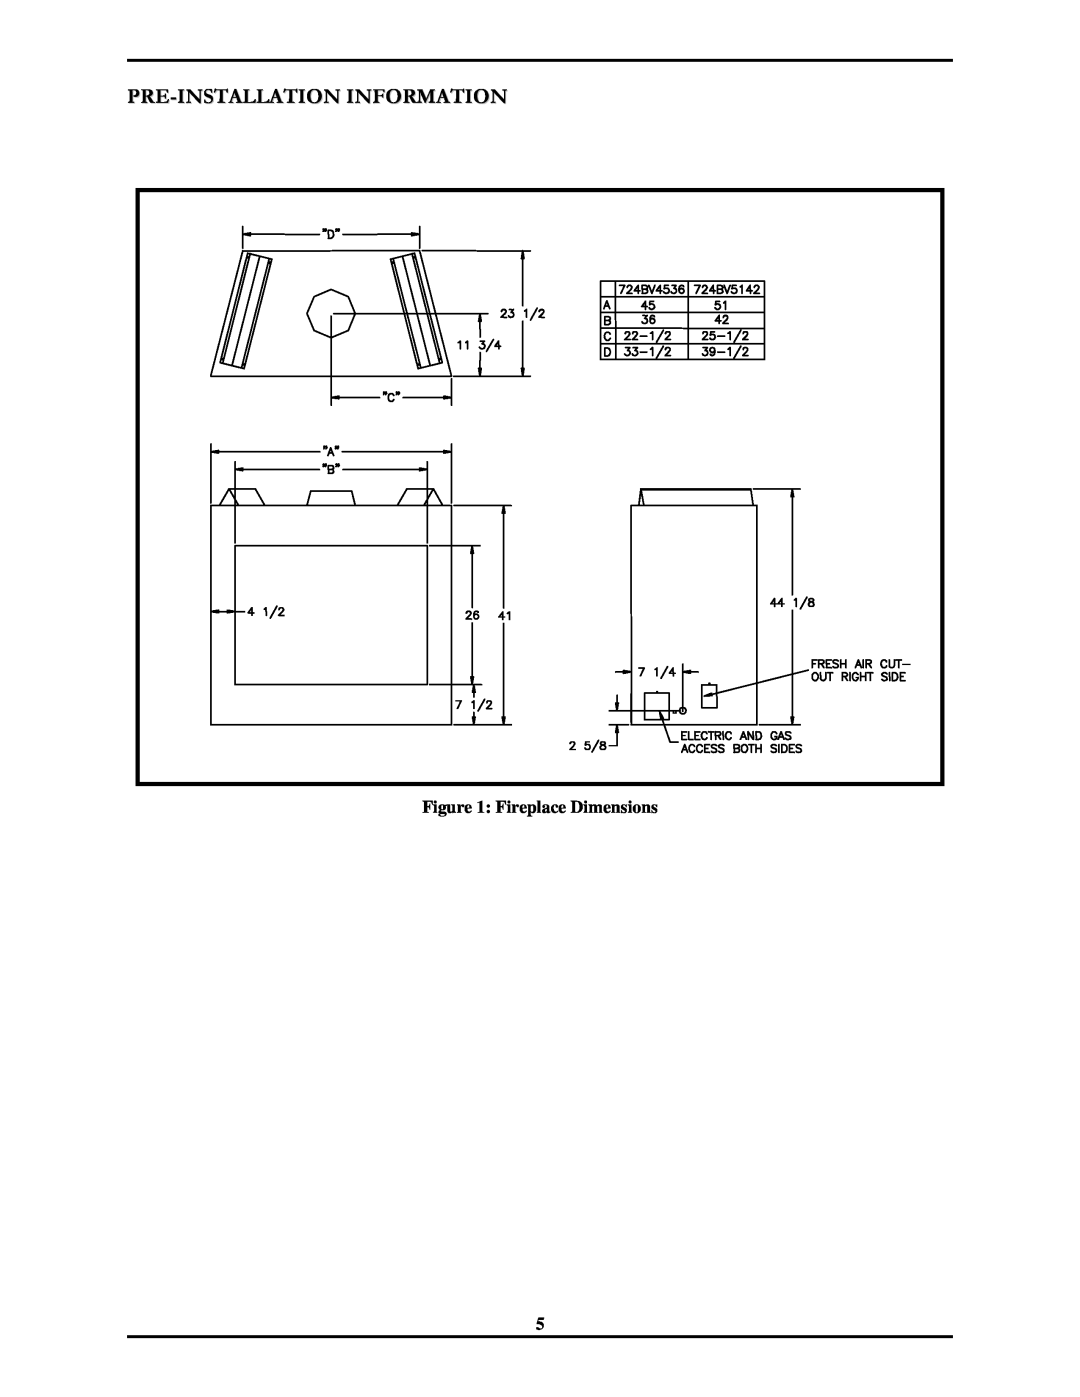 Monessen Hearth 7000 Series operating instructions Pre-Installationinformation, Fireplace Dimensions 